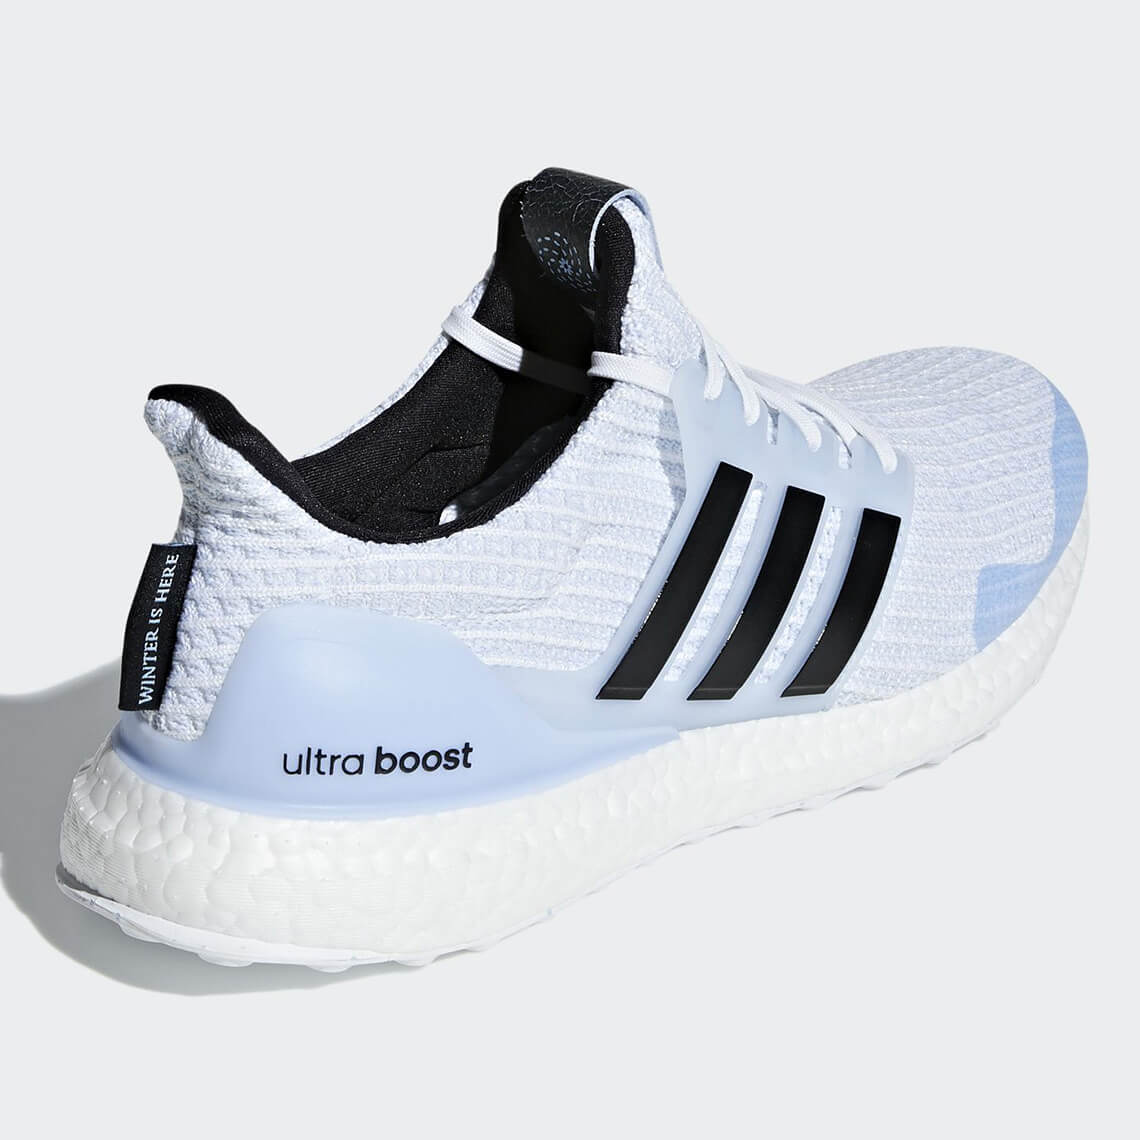 adidas ultra boost game of thrones white walkers EE3708 3